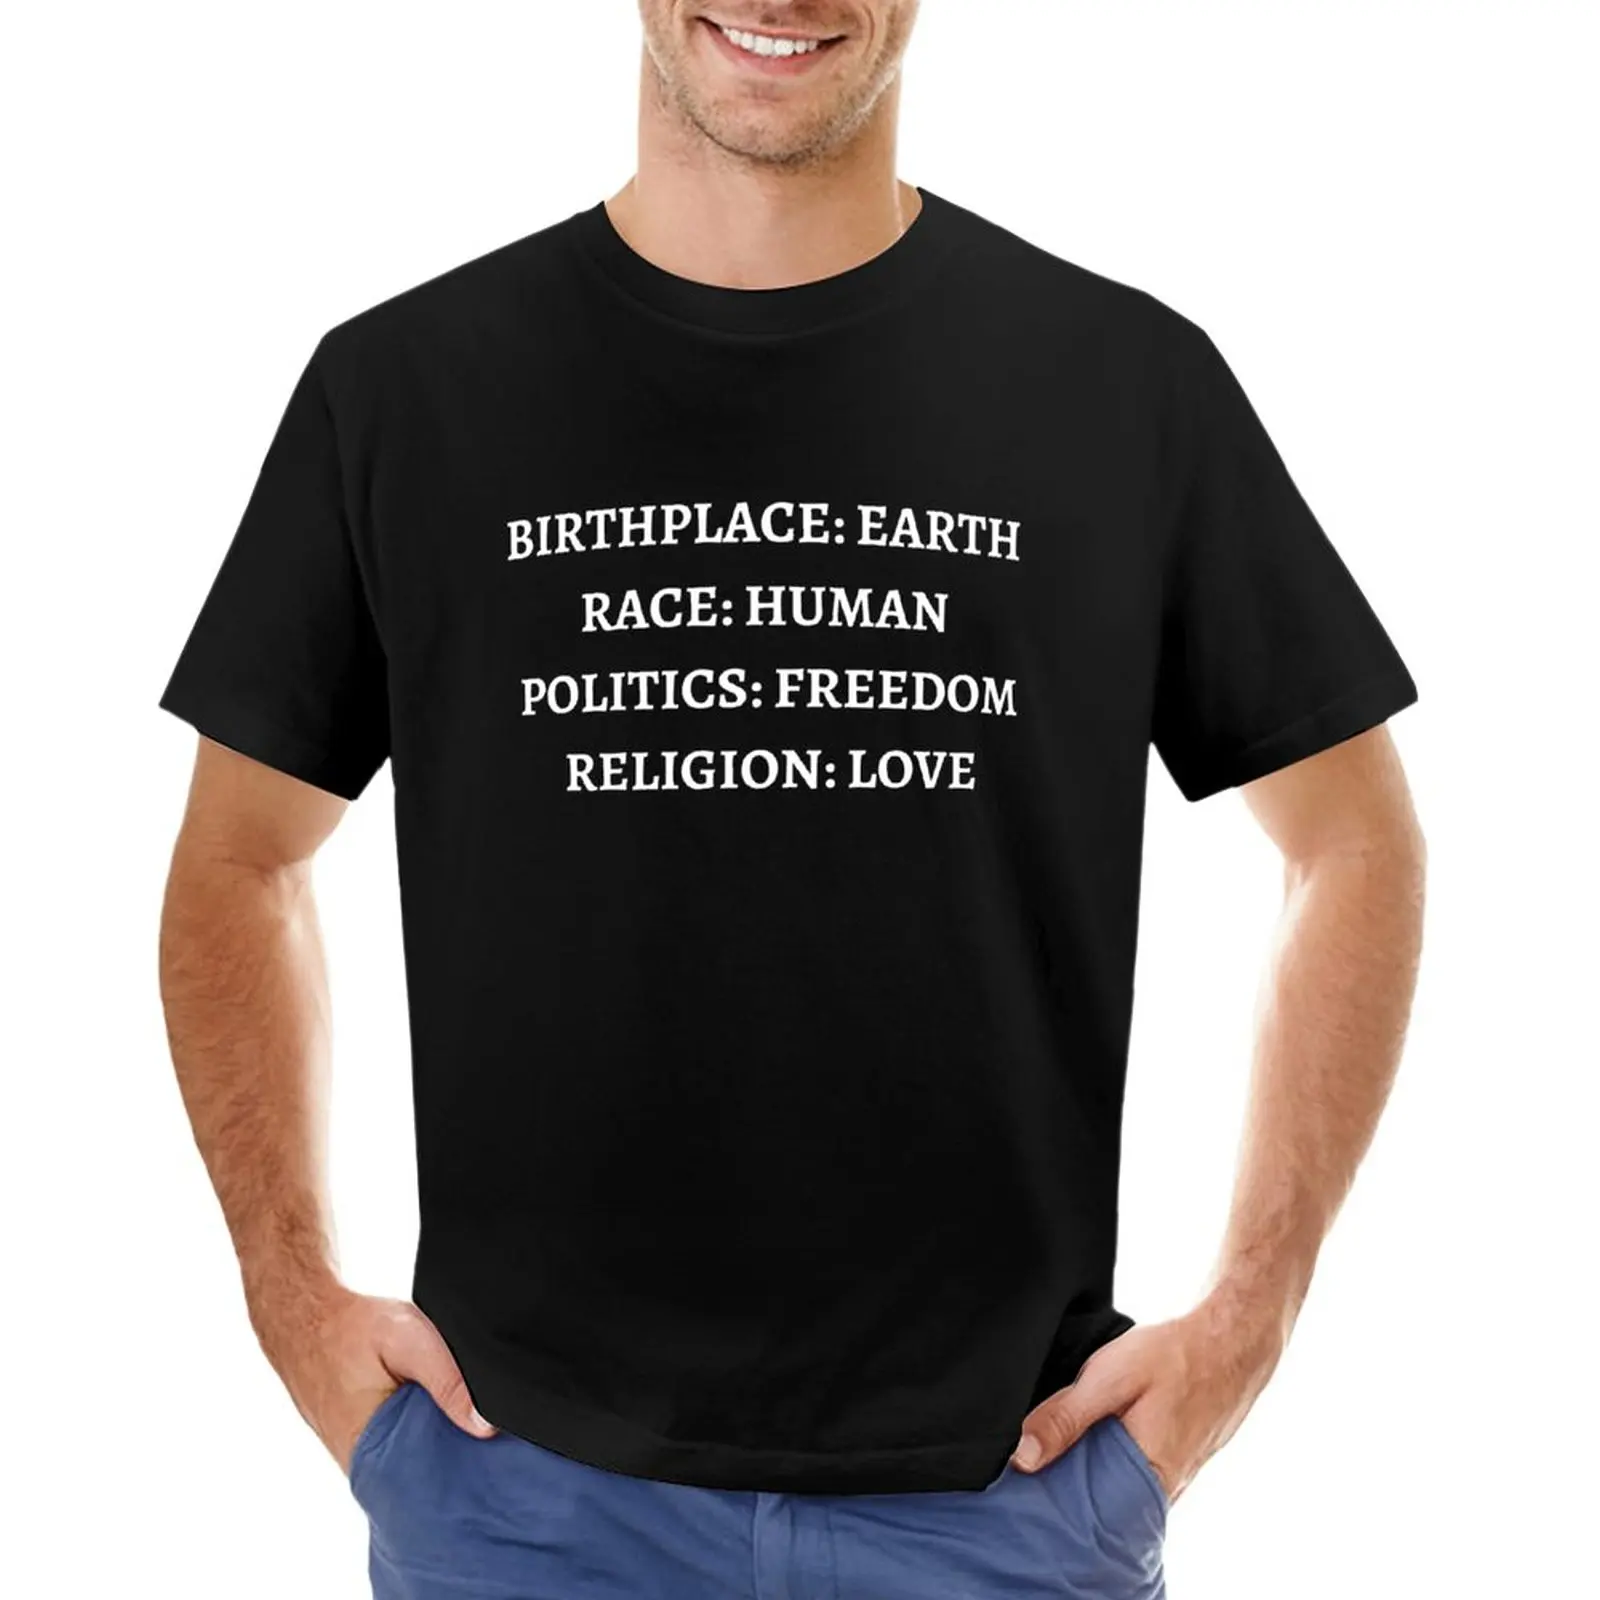 

BIRTH PLACE: EARTH, RACE: HUMAN, POLITICS: FREEDOM, RELIGION: LOVE T-Shirt Aesthetic clothing new edition mens white t shirts